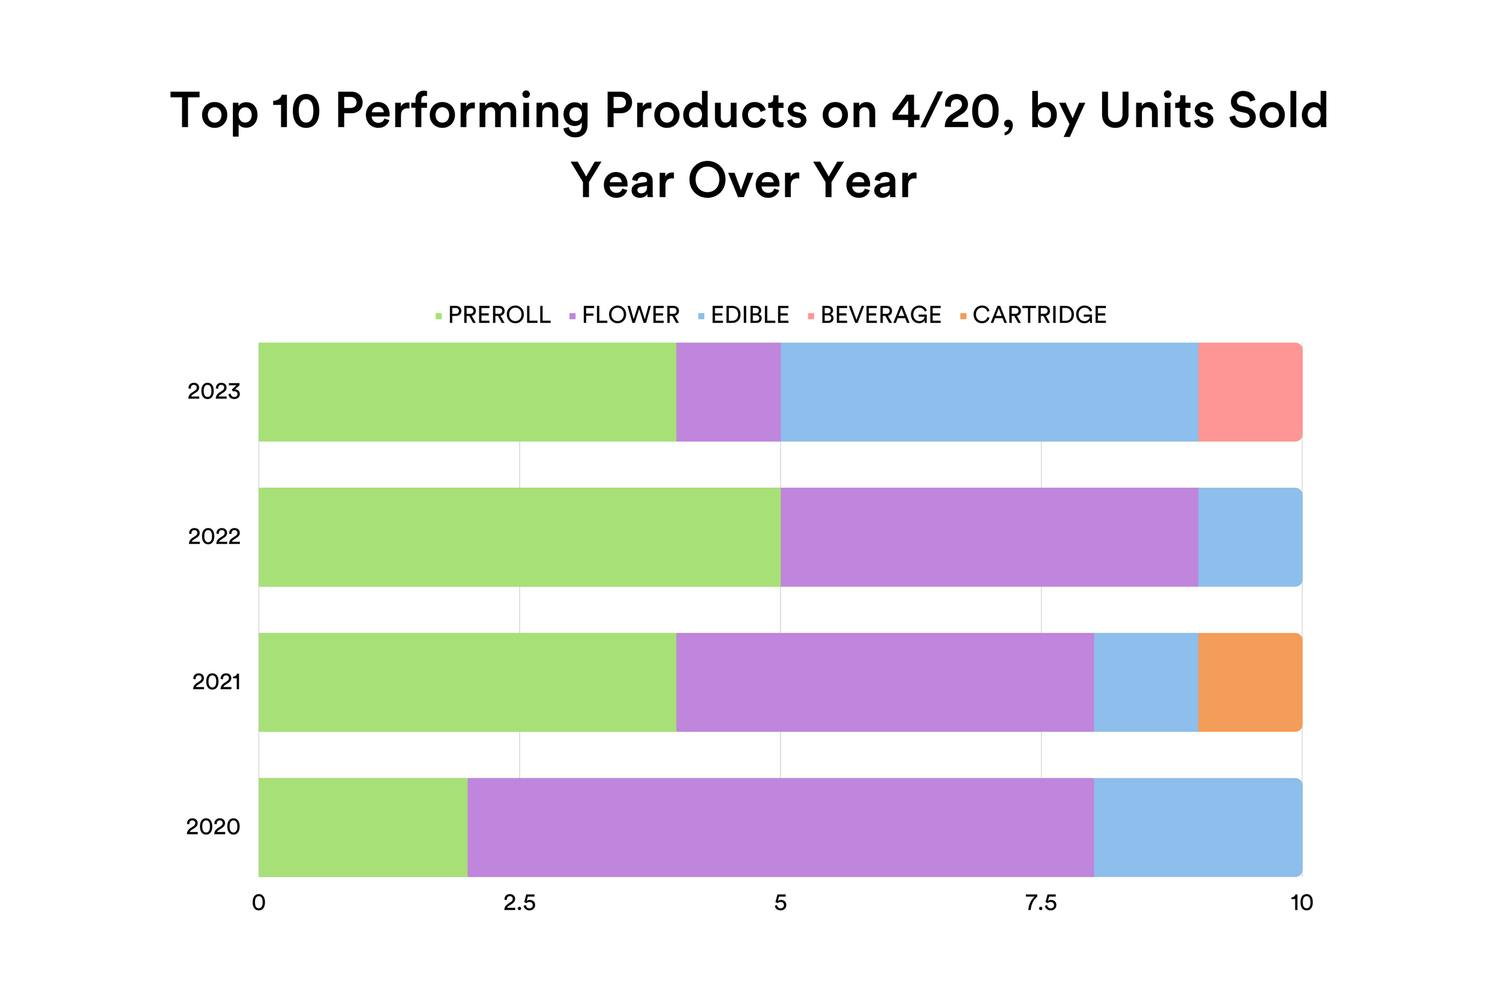 Top 10 Performing Products on 420, by Units Sold Year Over Year are shows from 2020 to 2023, with prerolls and flower ranking the highest, beverages only are displayed as a top 10 product for 2023 and cartridge is only represented in 2021